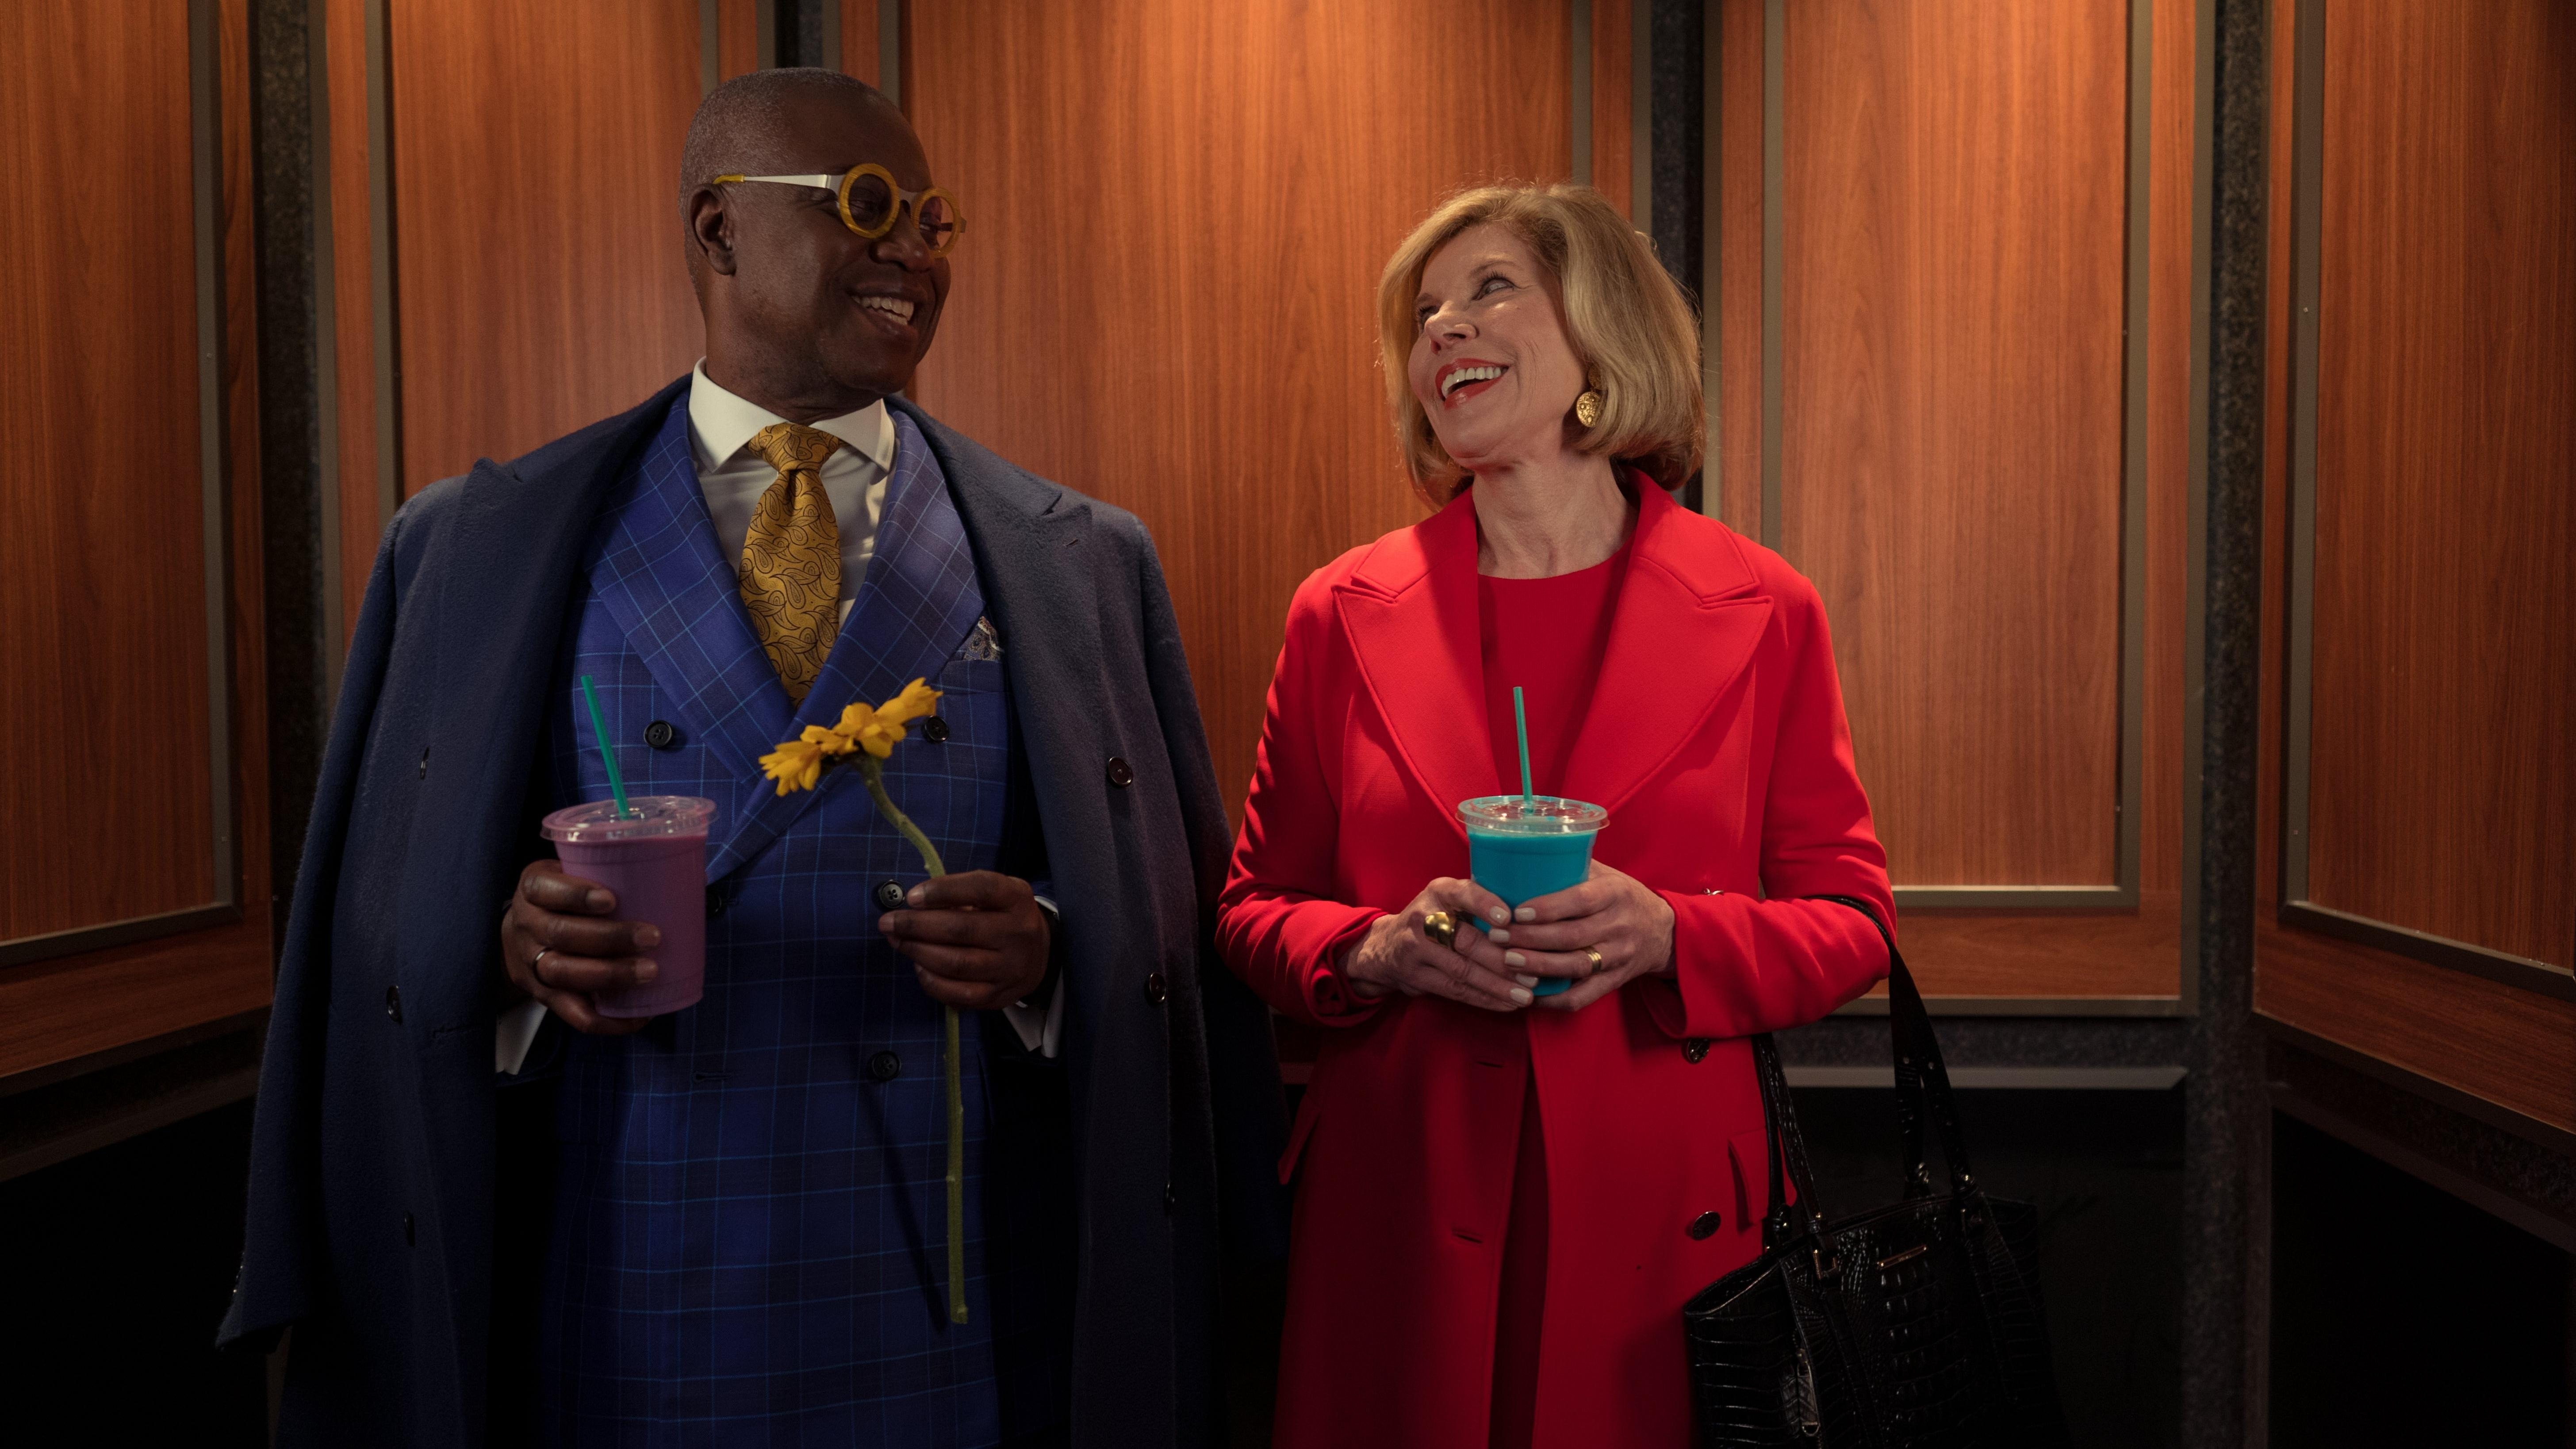 The Good Fight‘s final season is a worthy, timely sendoff